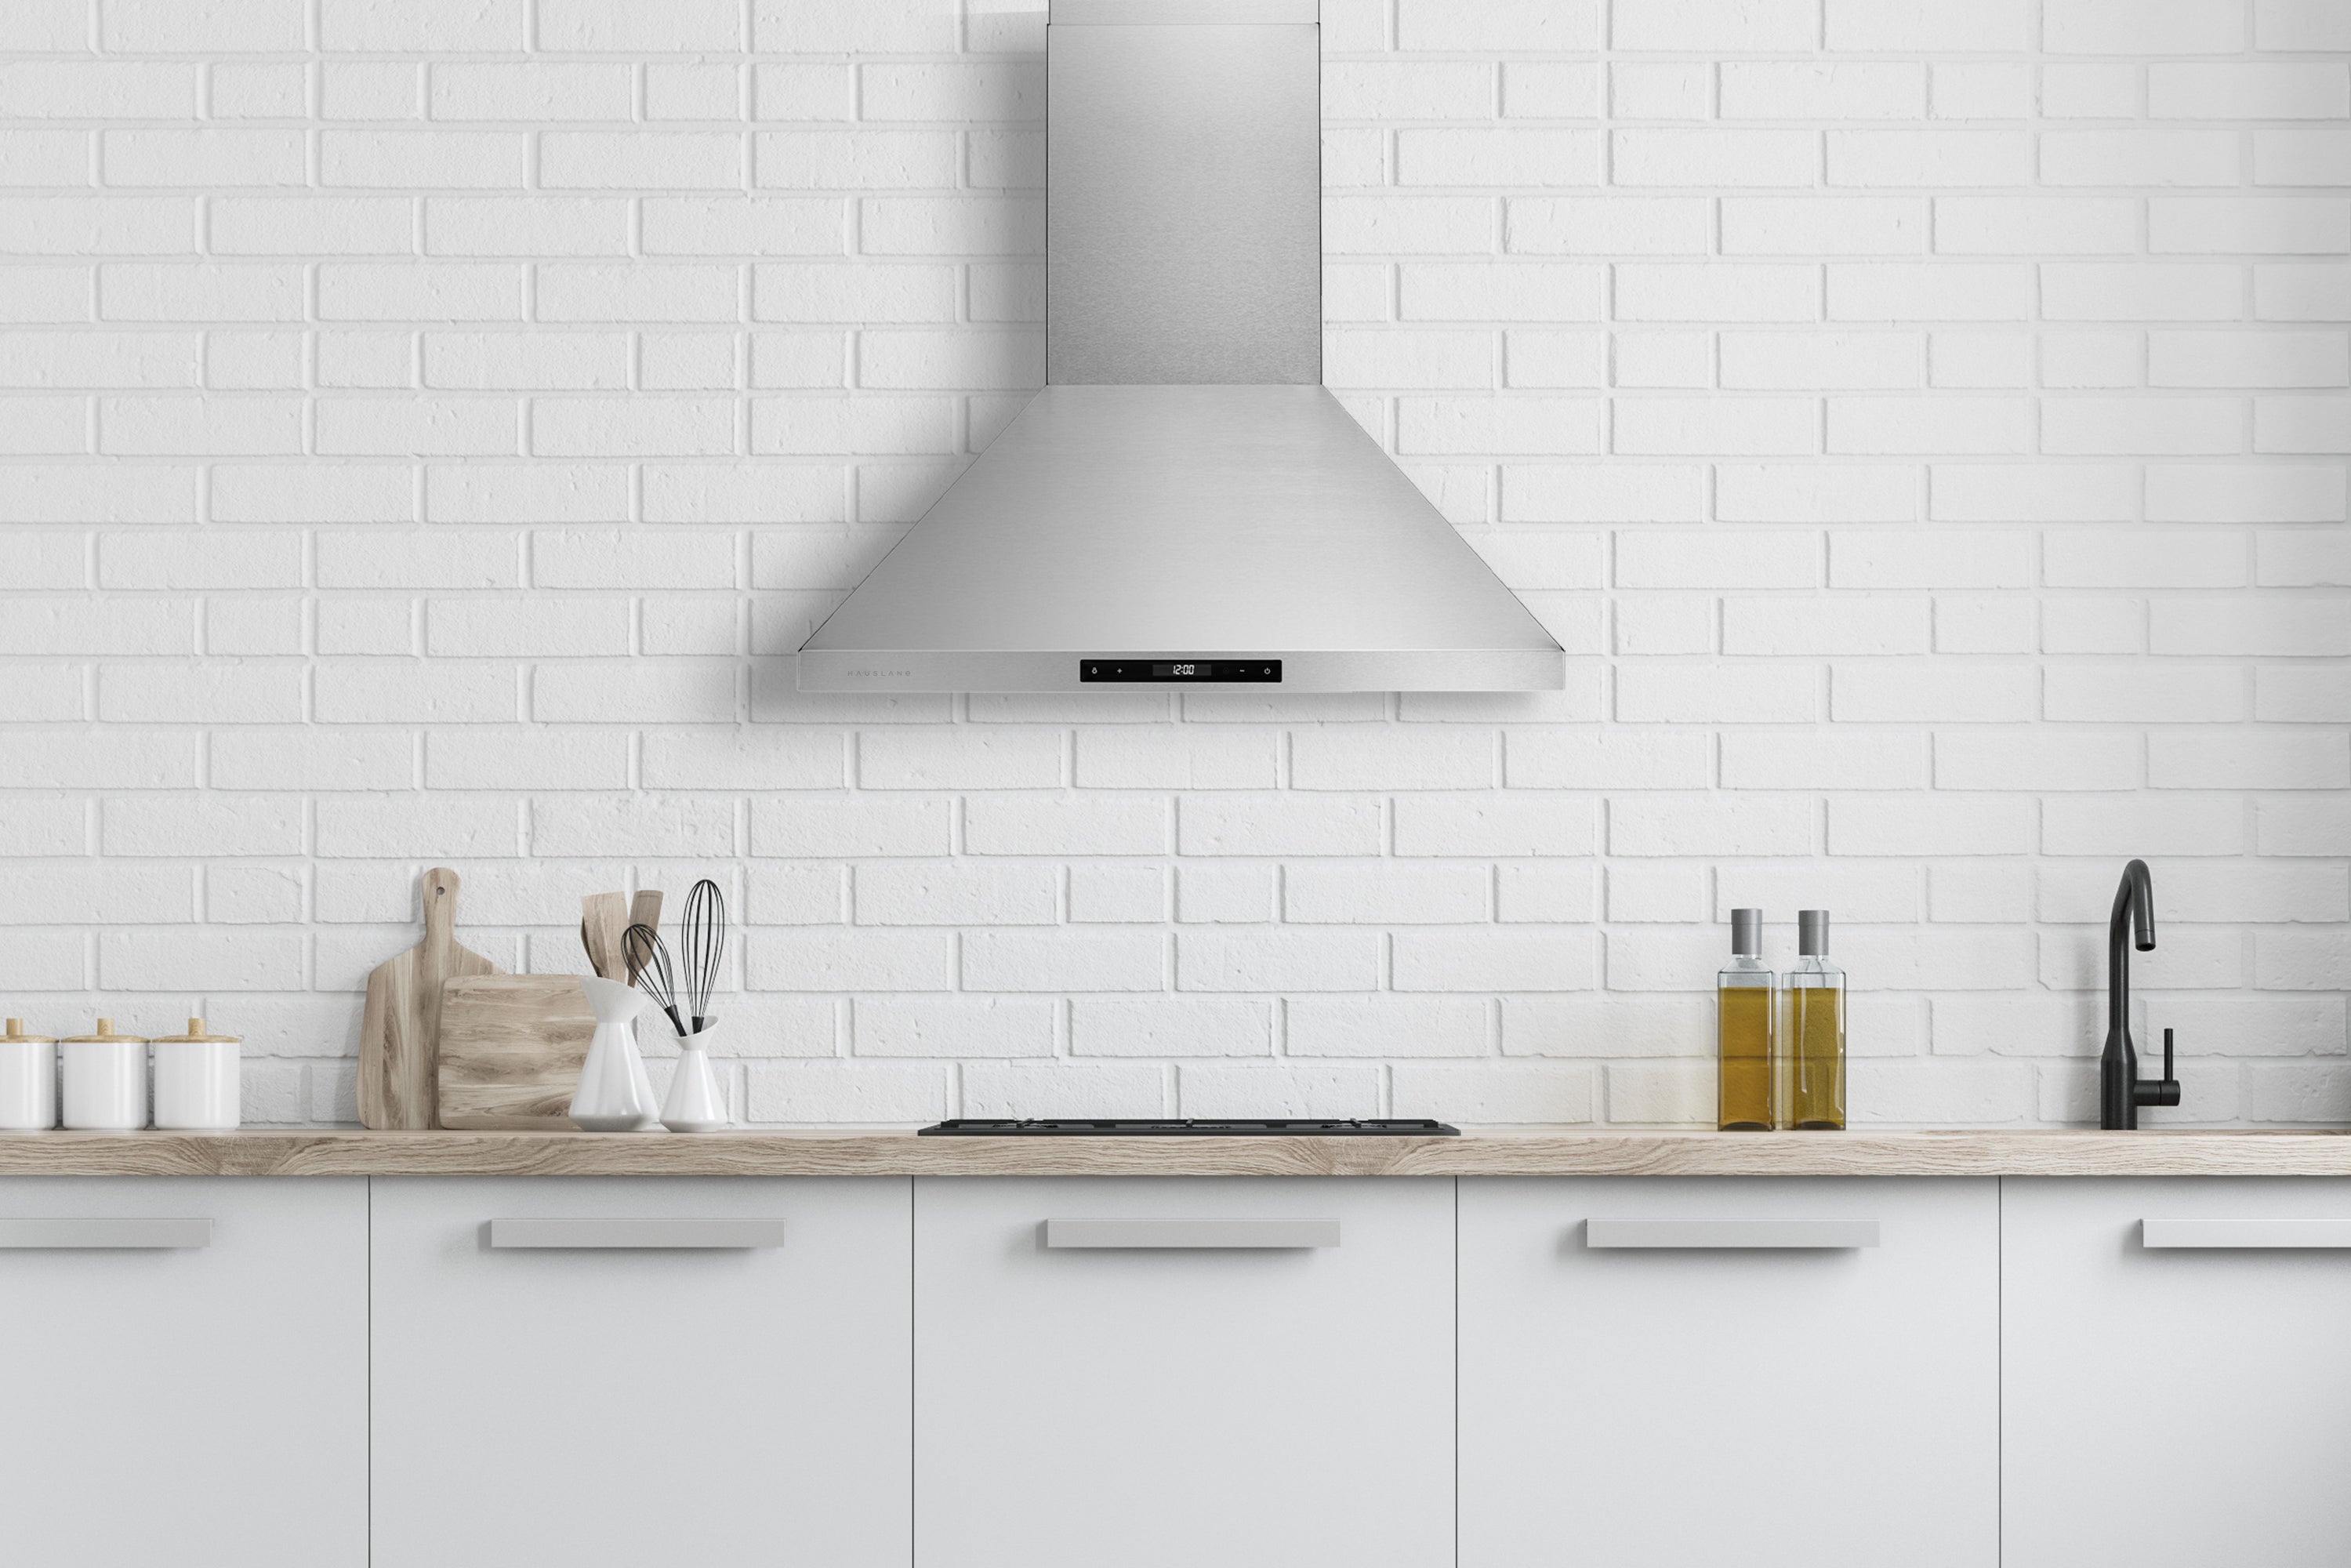 moving a range hood by a few inches  Range hood, New house - kitchen, Ikea  kitchen